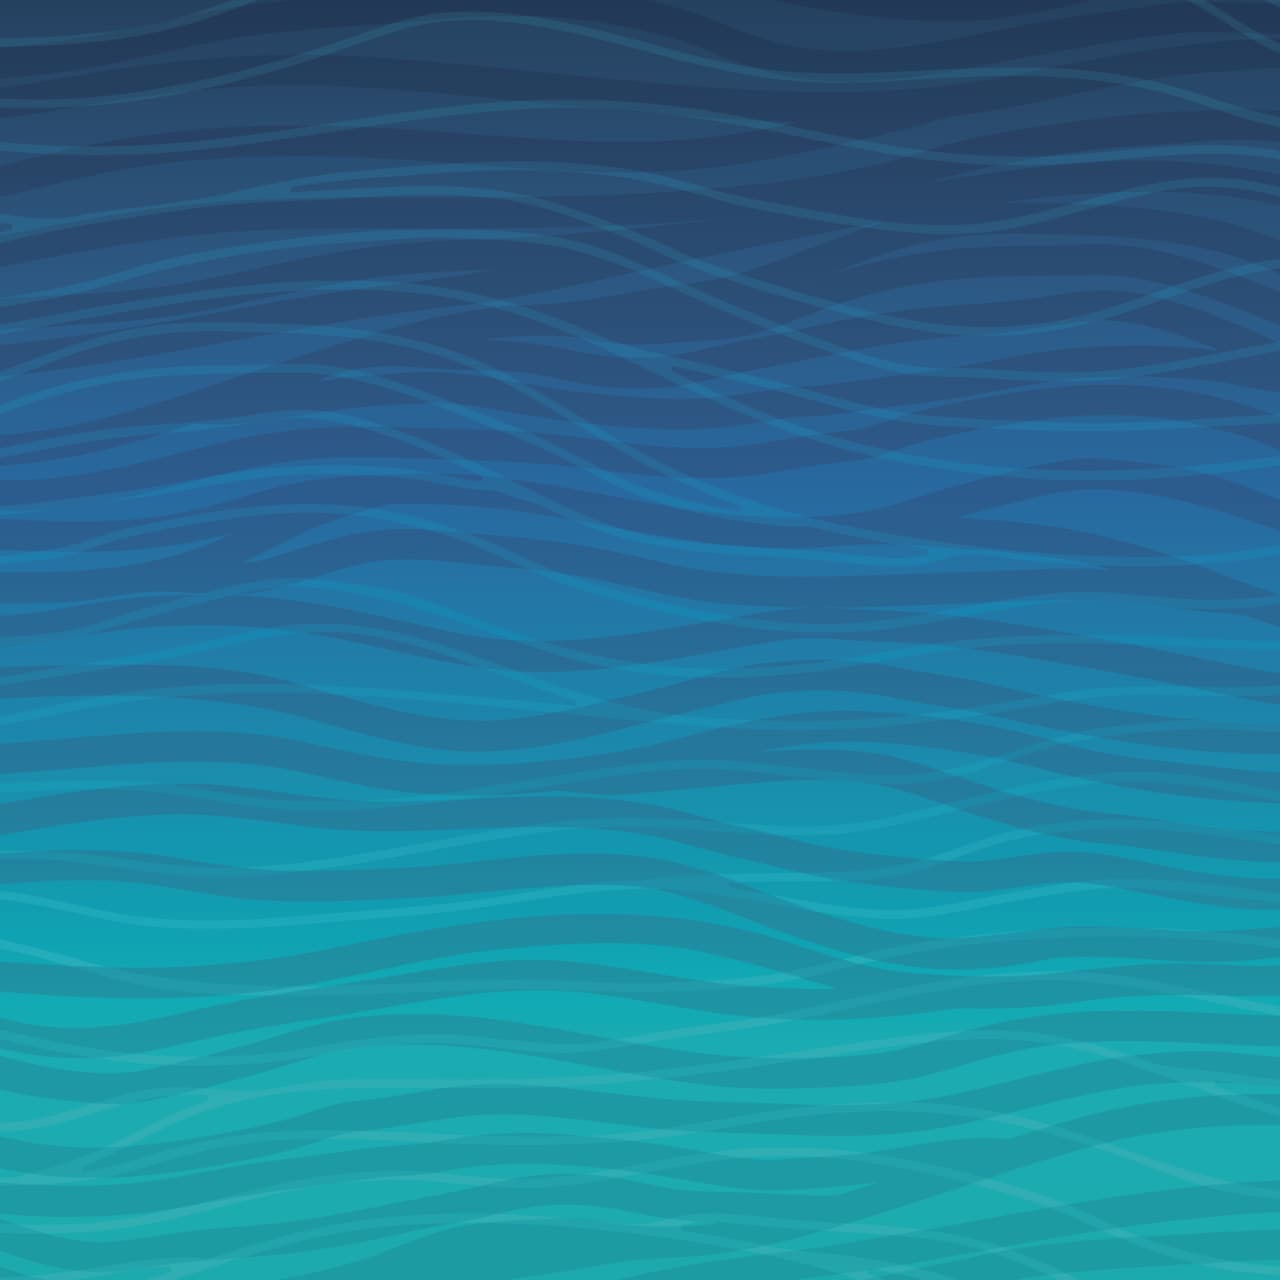 Blue background with wavy blue lines 